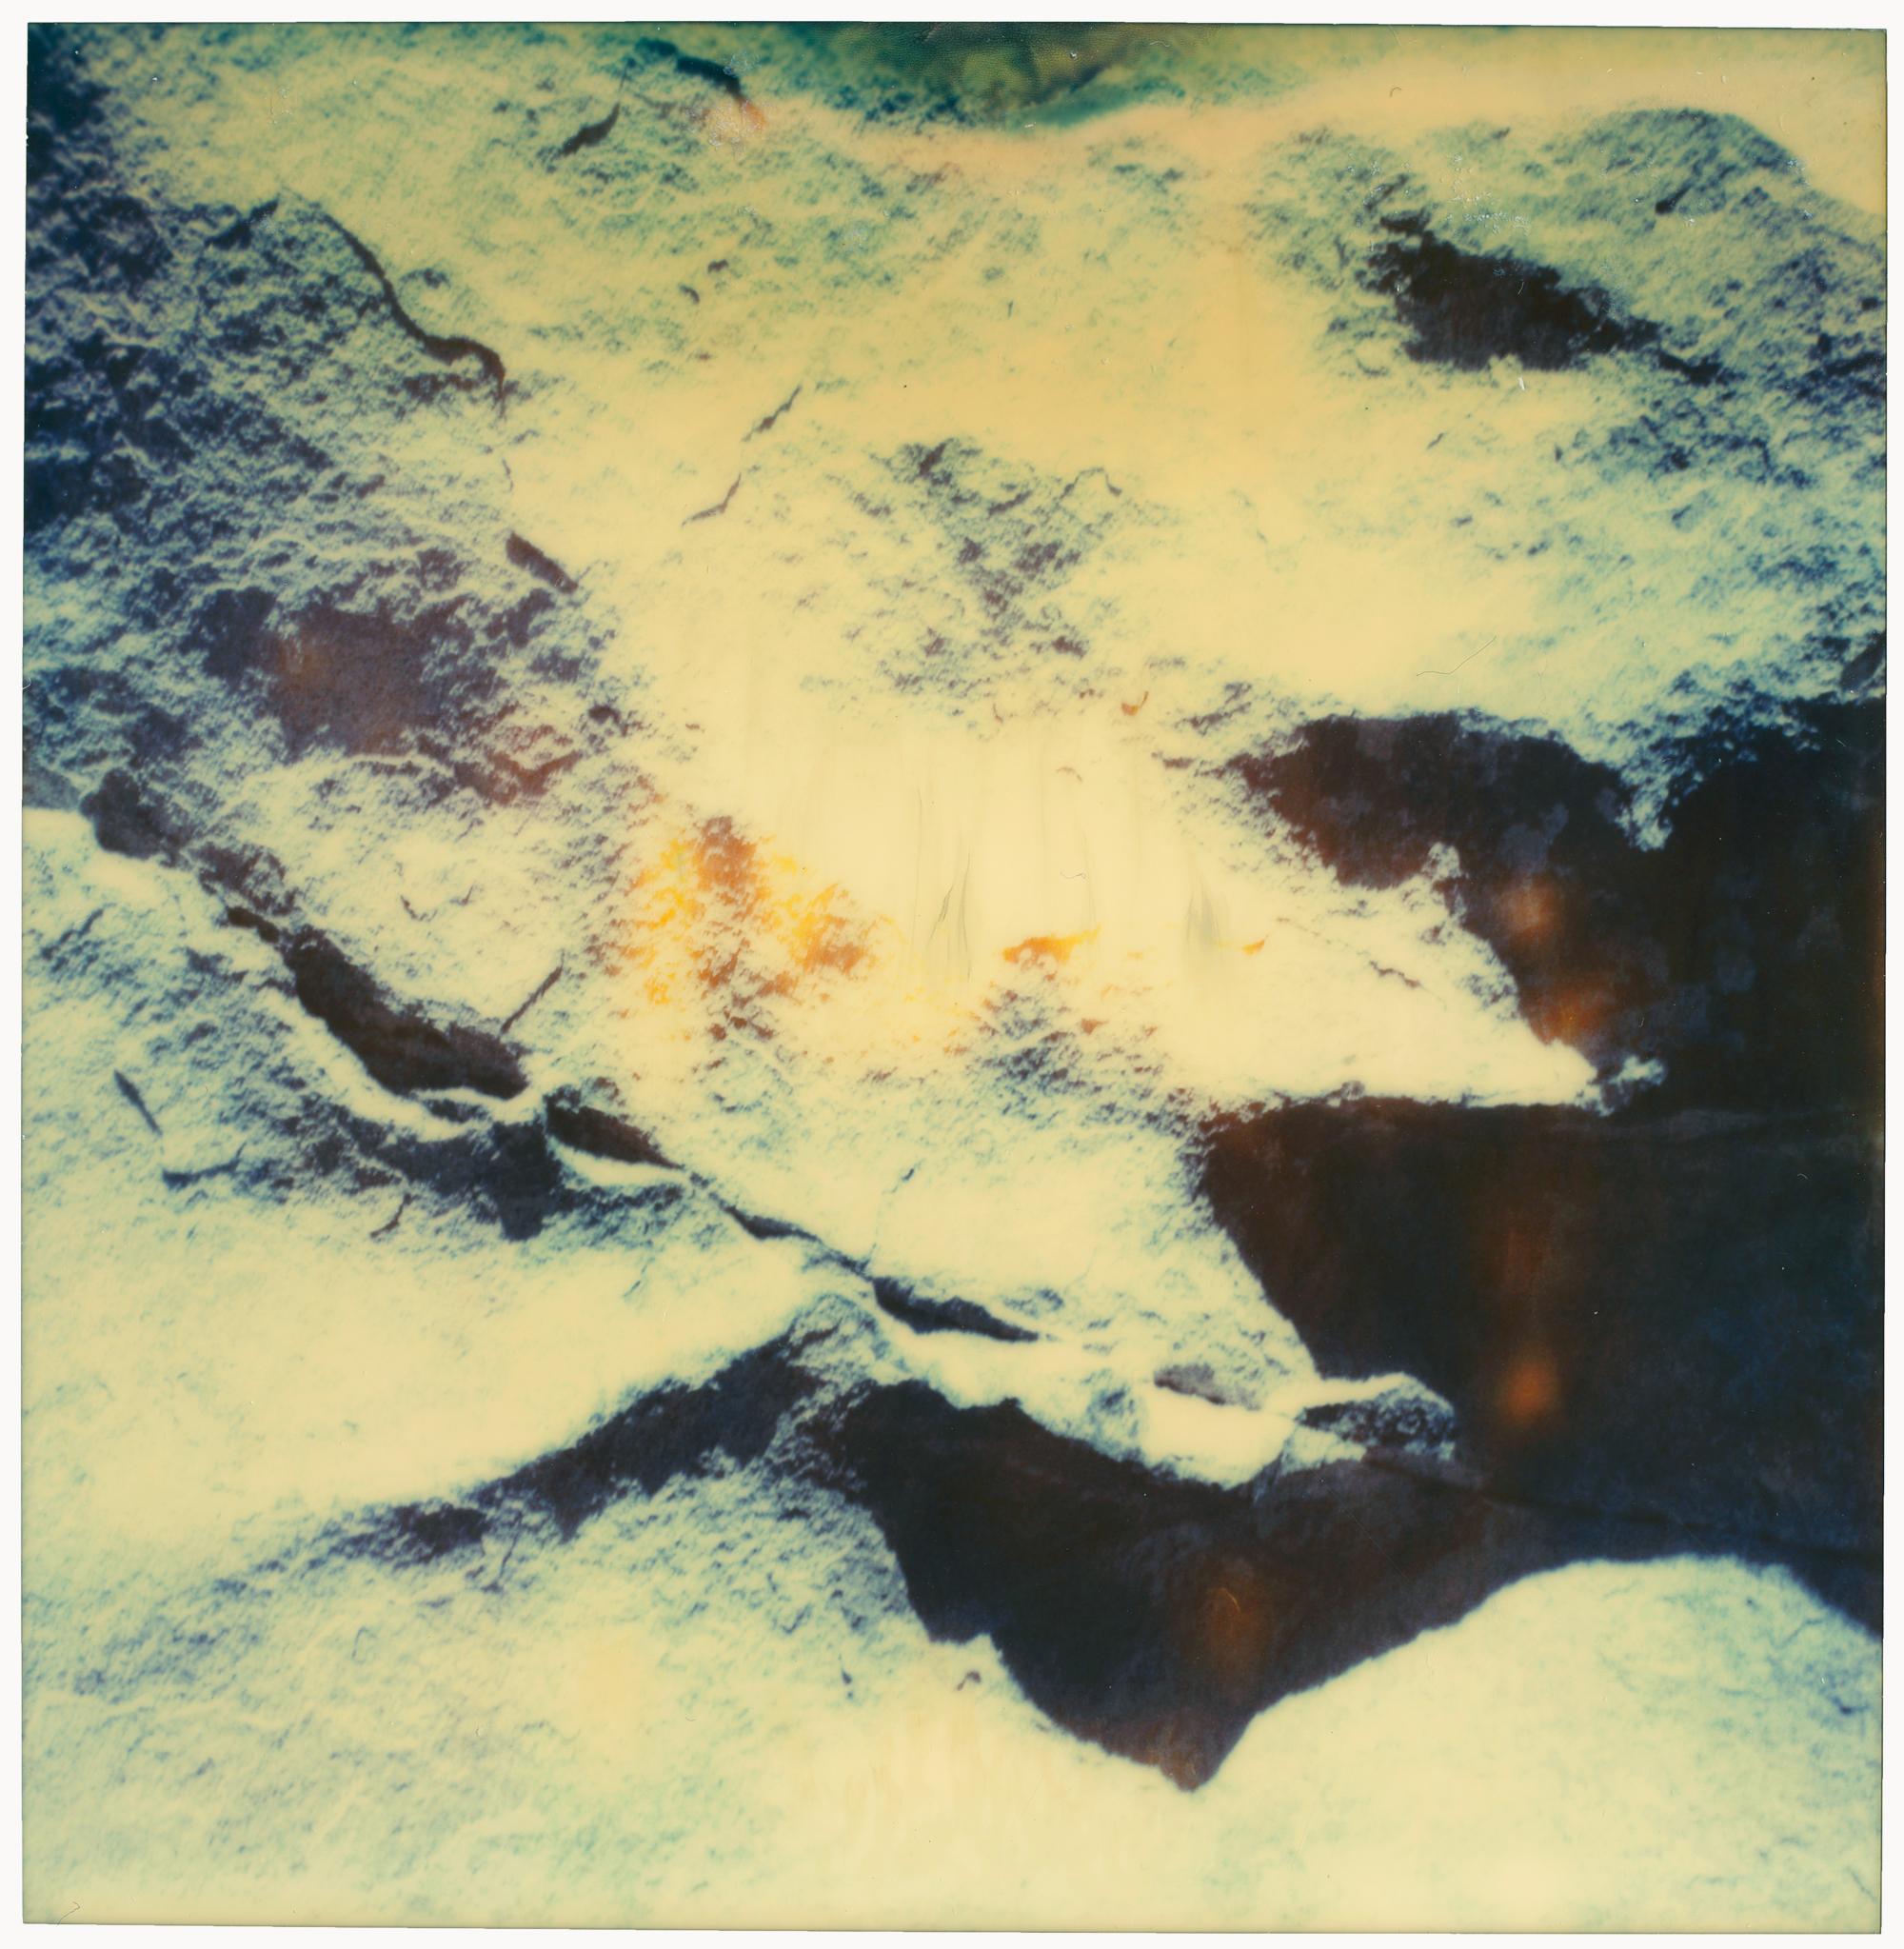 Moonscape - Planet of the Apes 03 - 21st Century, Polaroid, Abstract